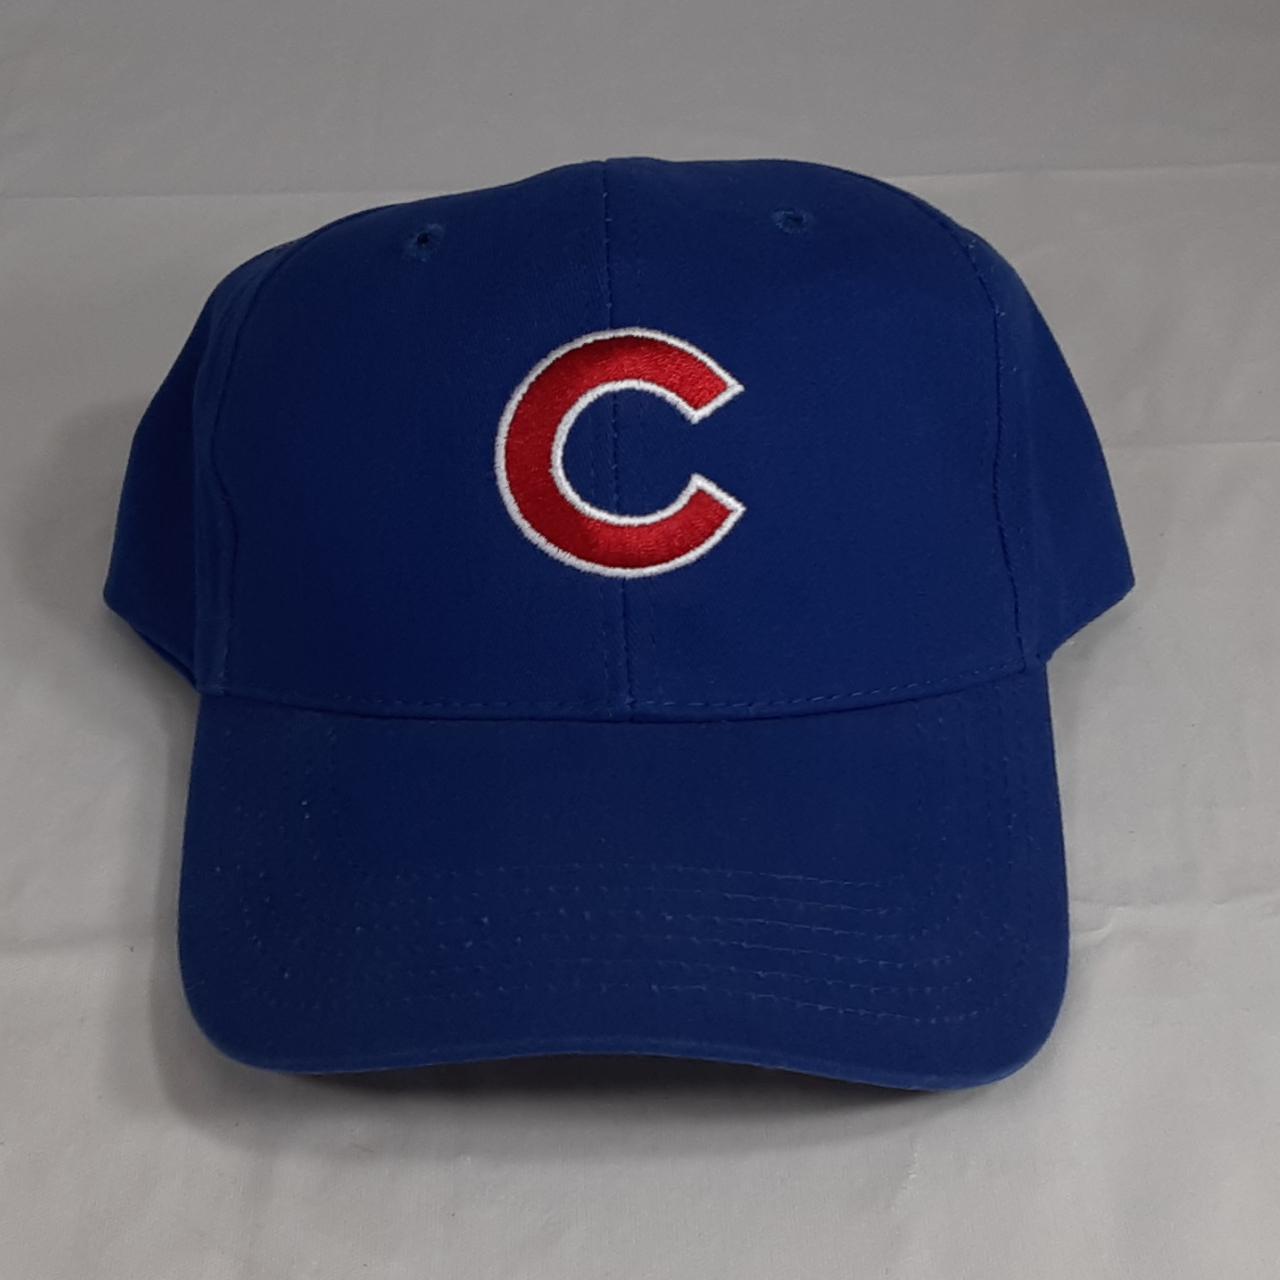 Chicago Cubs Hat Fan Favorite blue and red